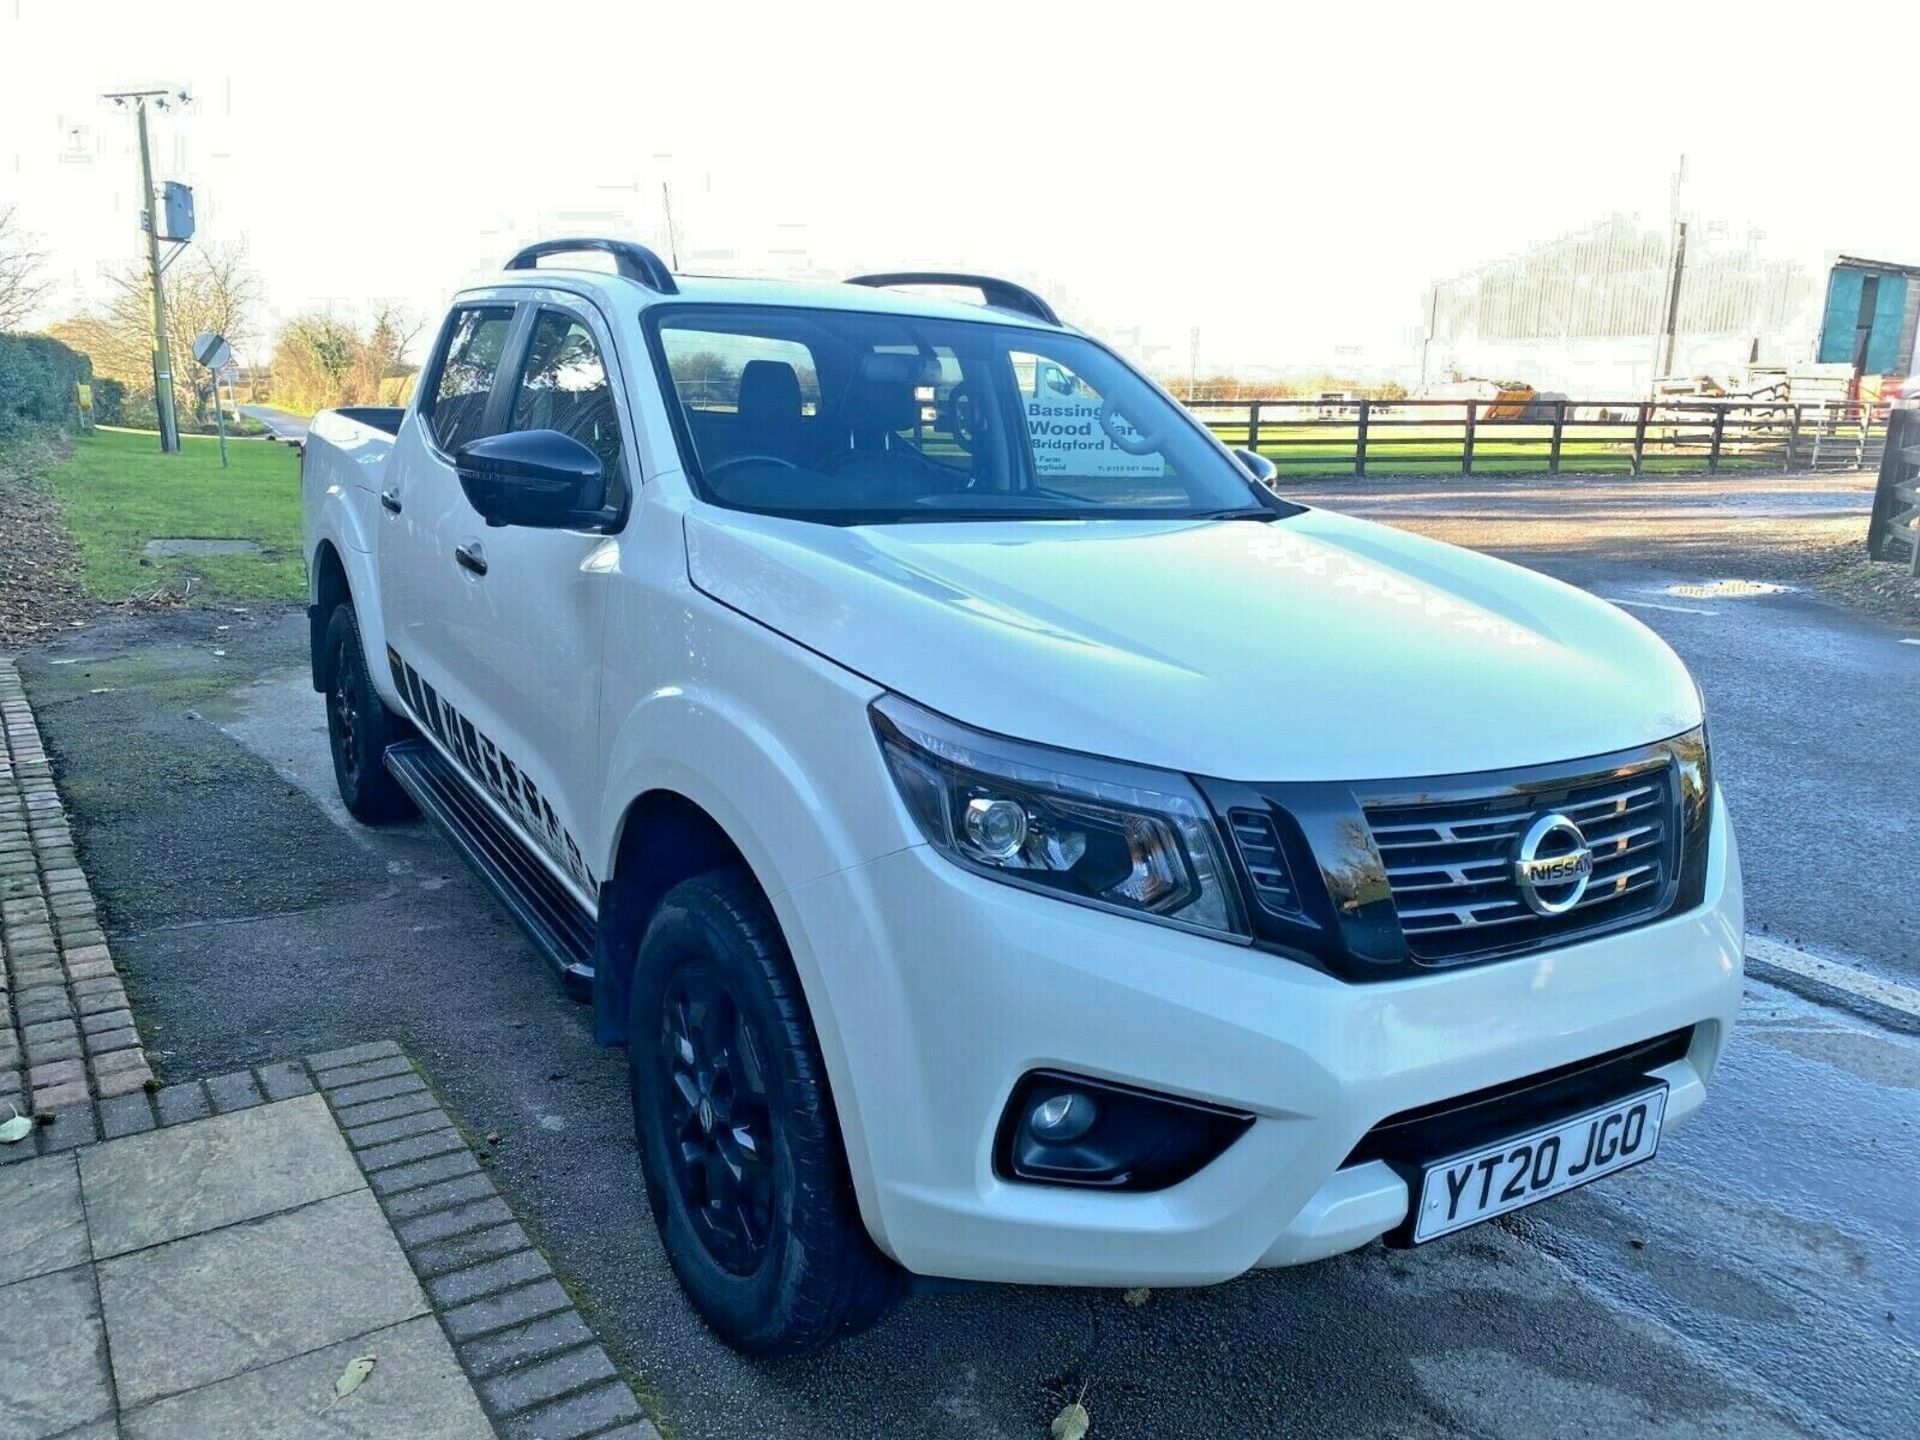 2020 NISSAN NAVARA N-GUARD DCI AUTO 4WD WHITE PICK UP, 1 OWNER FROM NEW, 21,971 MILES *PLUS VAT*